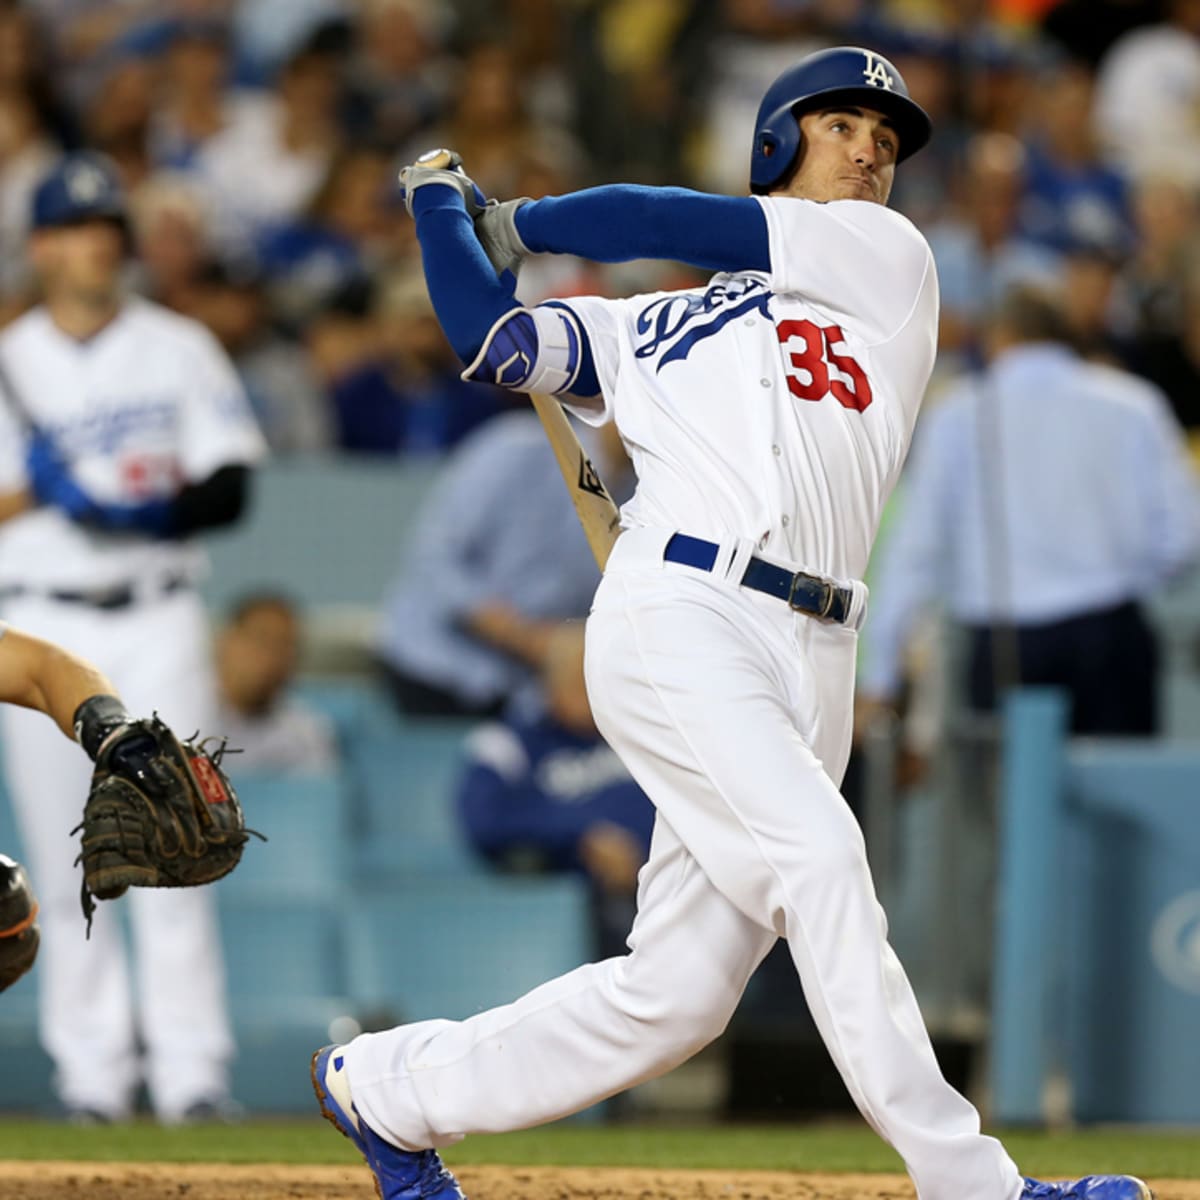 Cody Bellinger homers, collects three hits in win vs. Cardinals